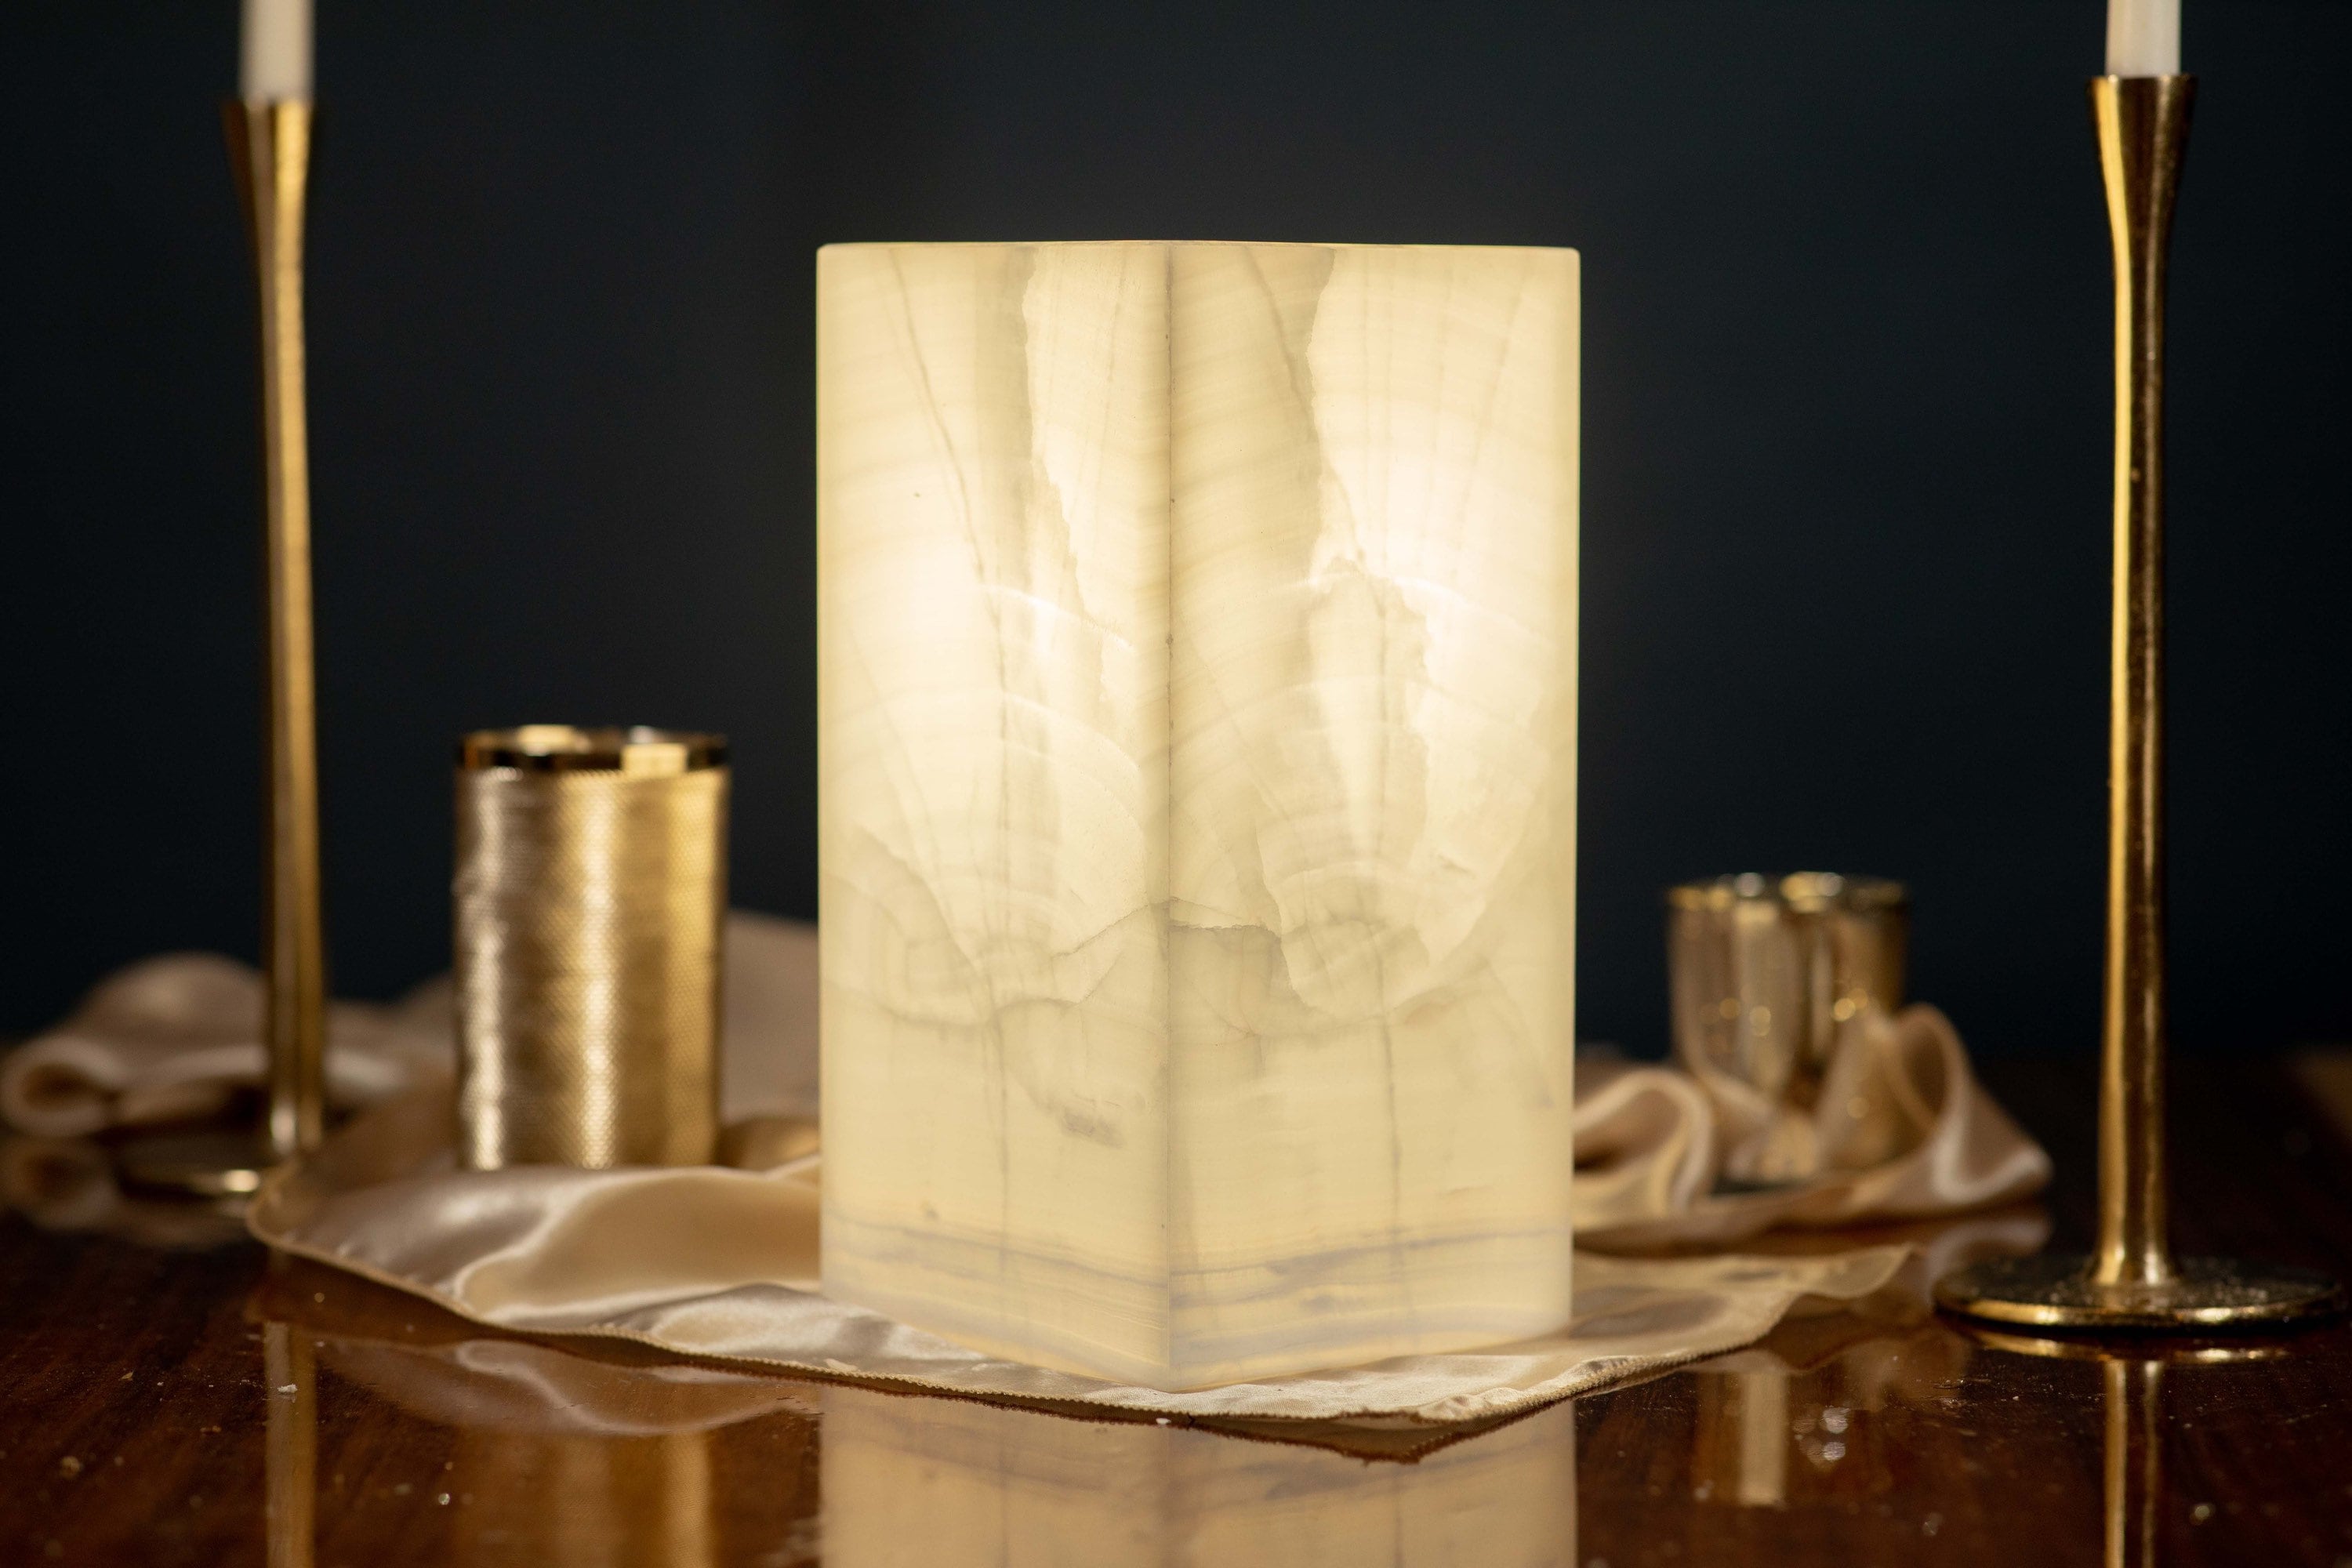 Serenity Stone Lamp - A tranquil addition to any room with its natural onyx stone material and calming warm glow.